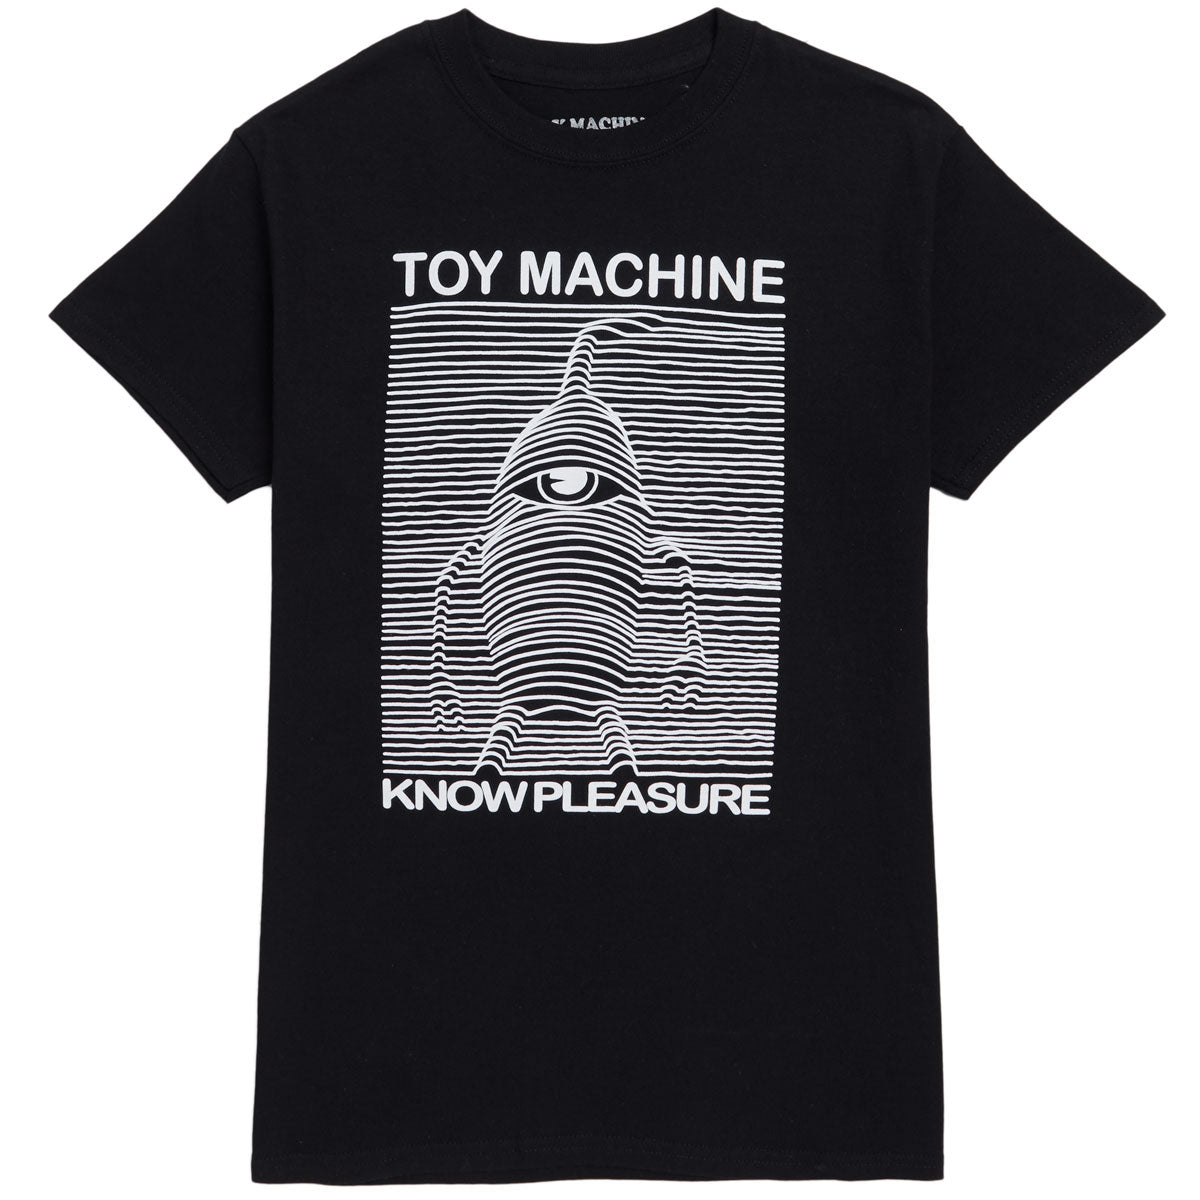 Toy Machine Toy Division T-Shirt - Black image 1